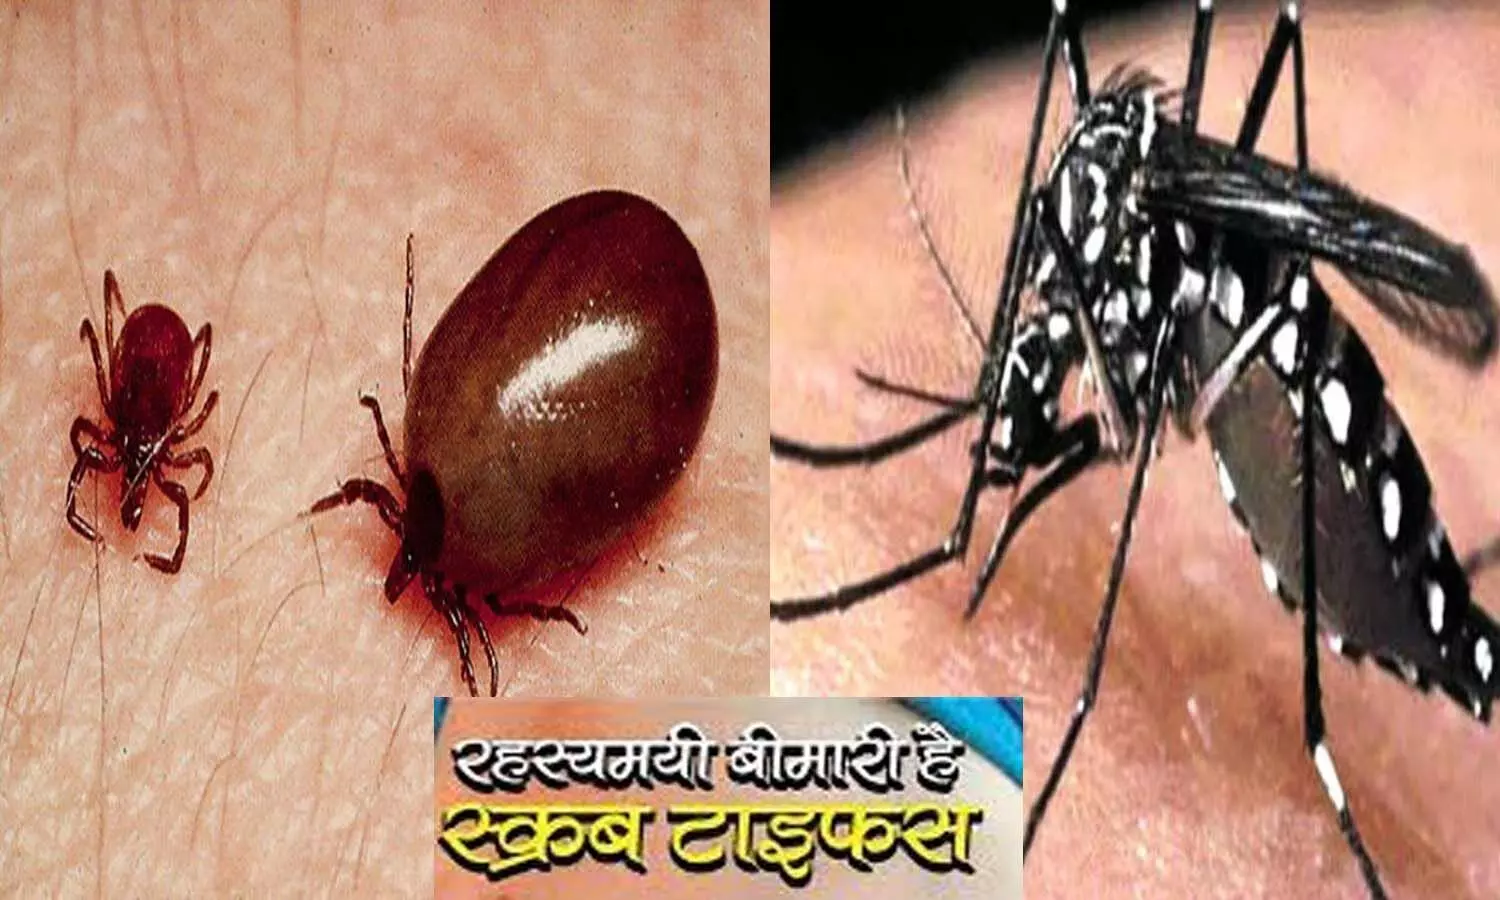 Cases of scrub typhus found with dengue-malaria, experts said - do not take antibiotics in every fever